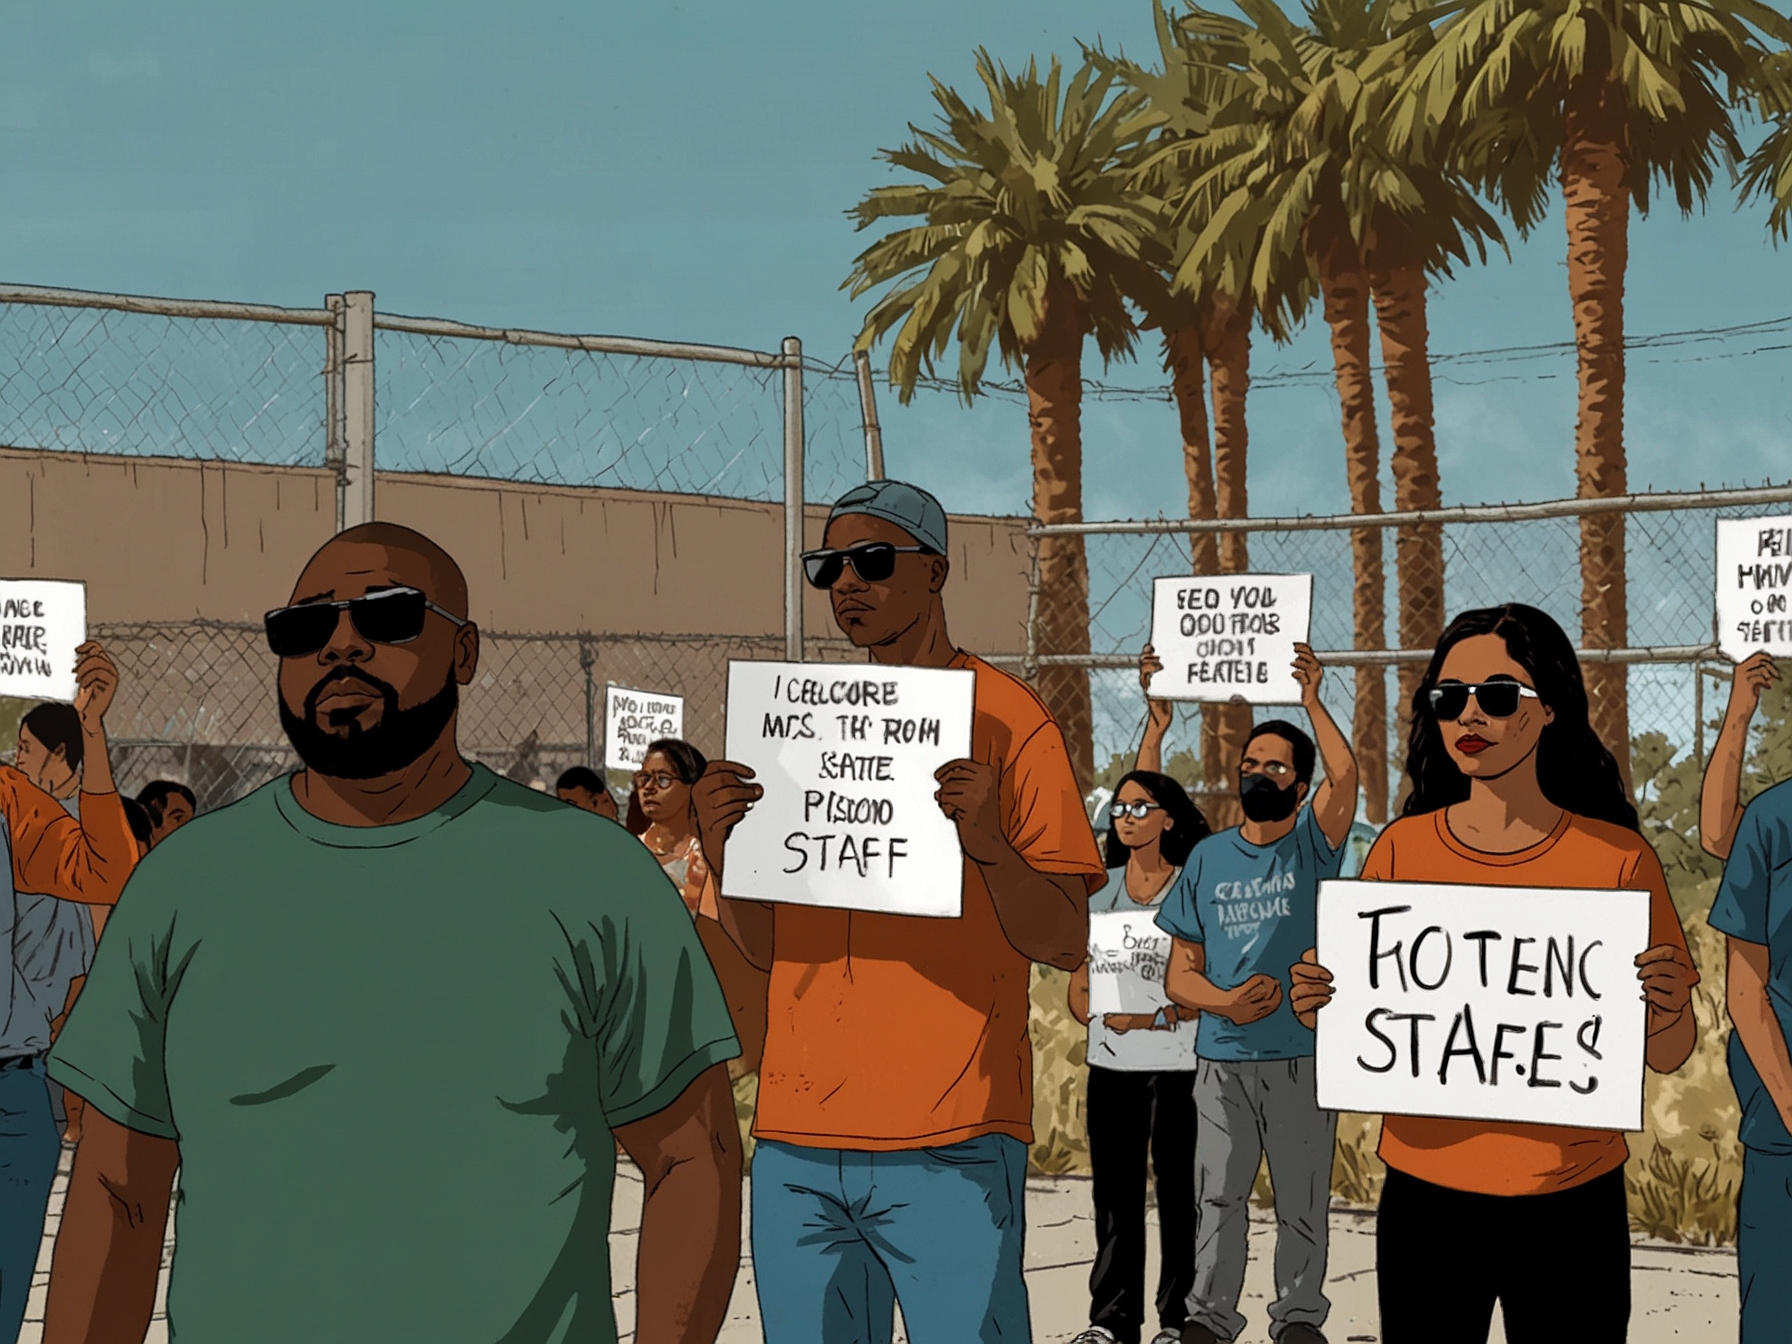 An image showing protestors outside a state correctional facility in California, holding signs demanding heat protection measures for prison staff amidst rising summer temperatures.